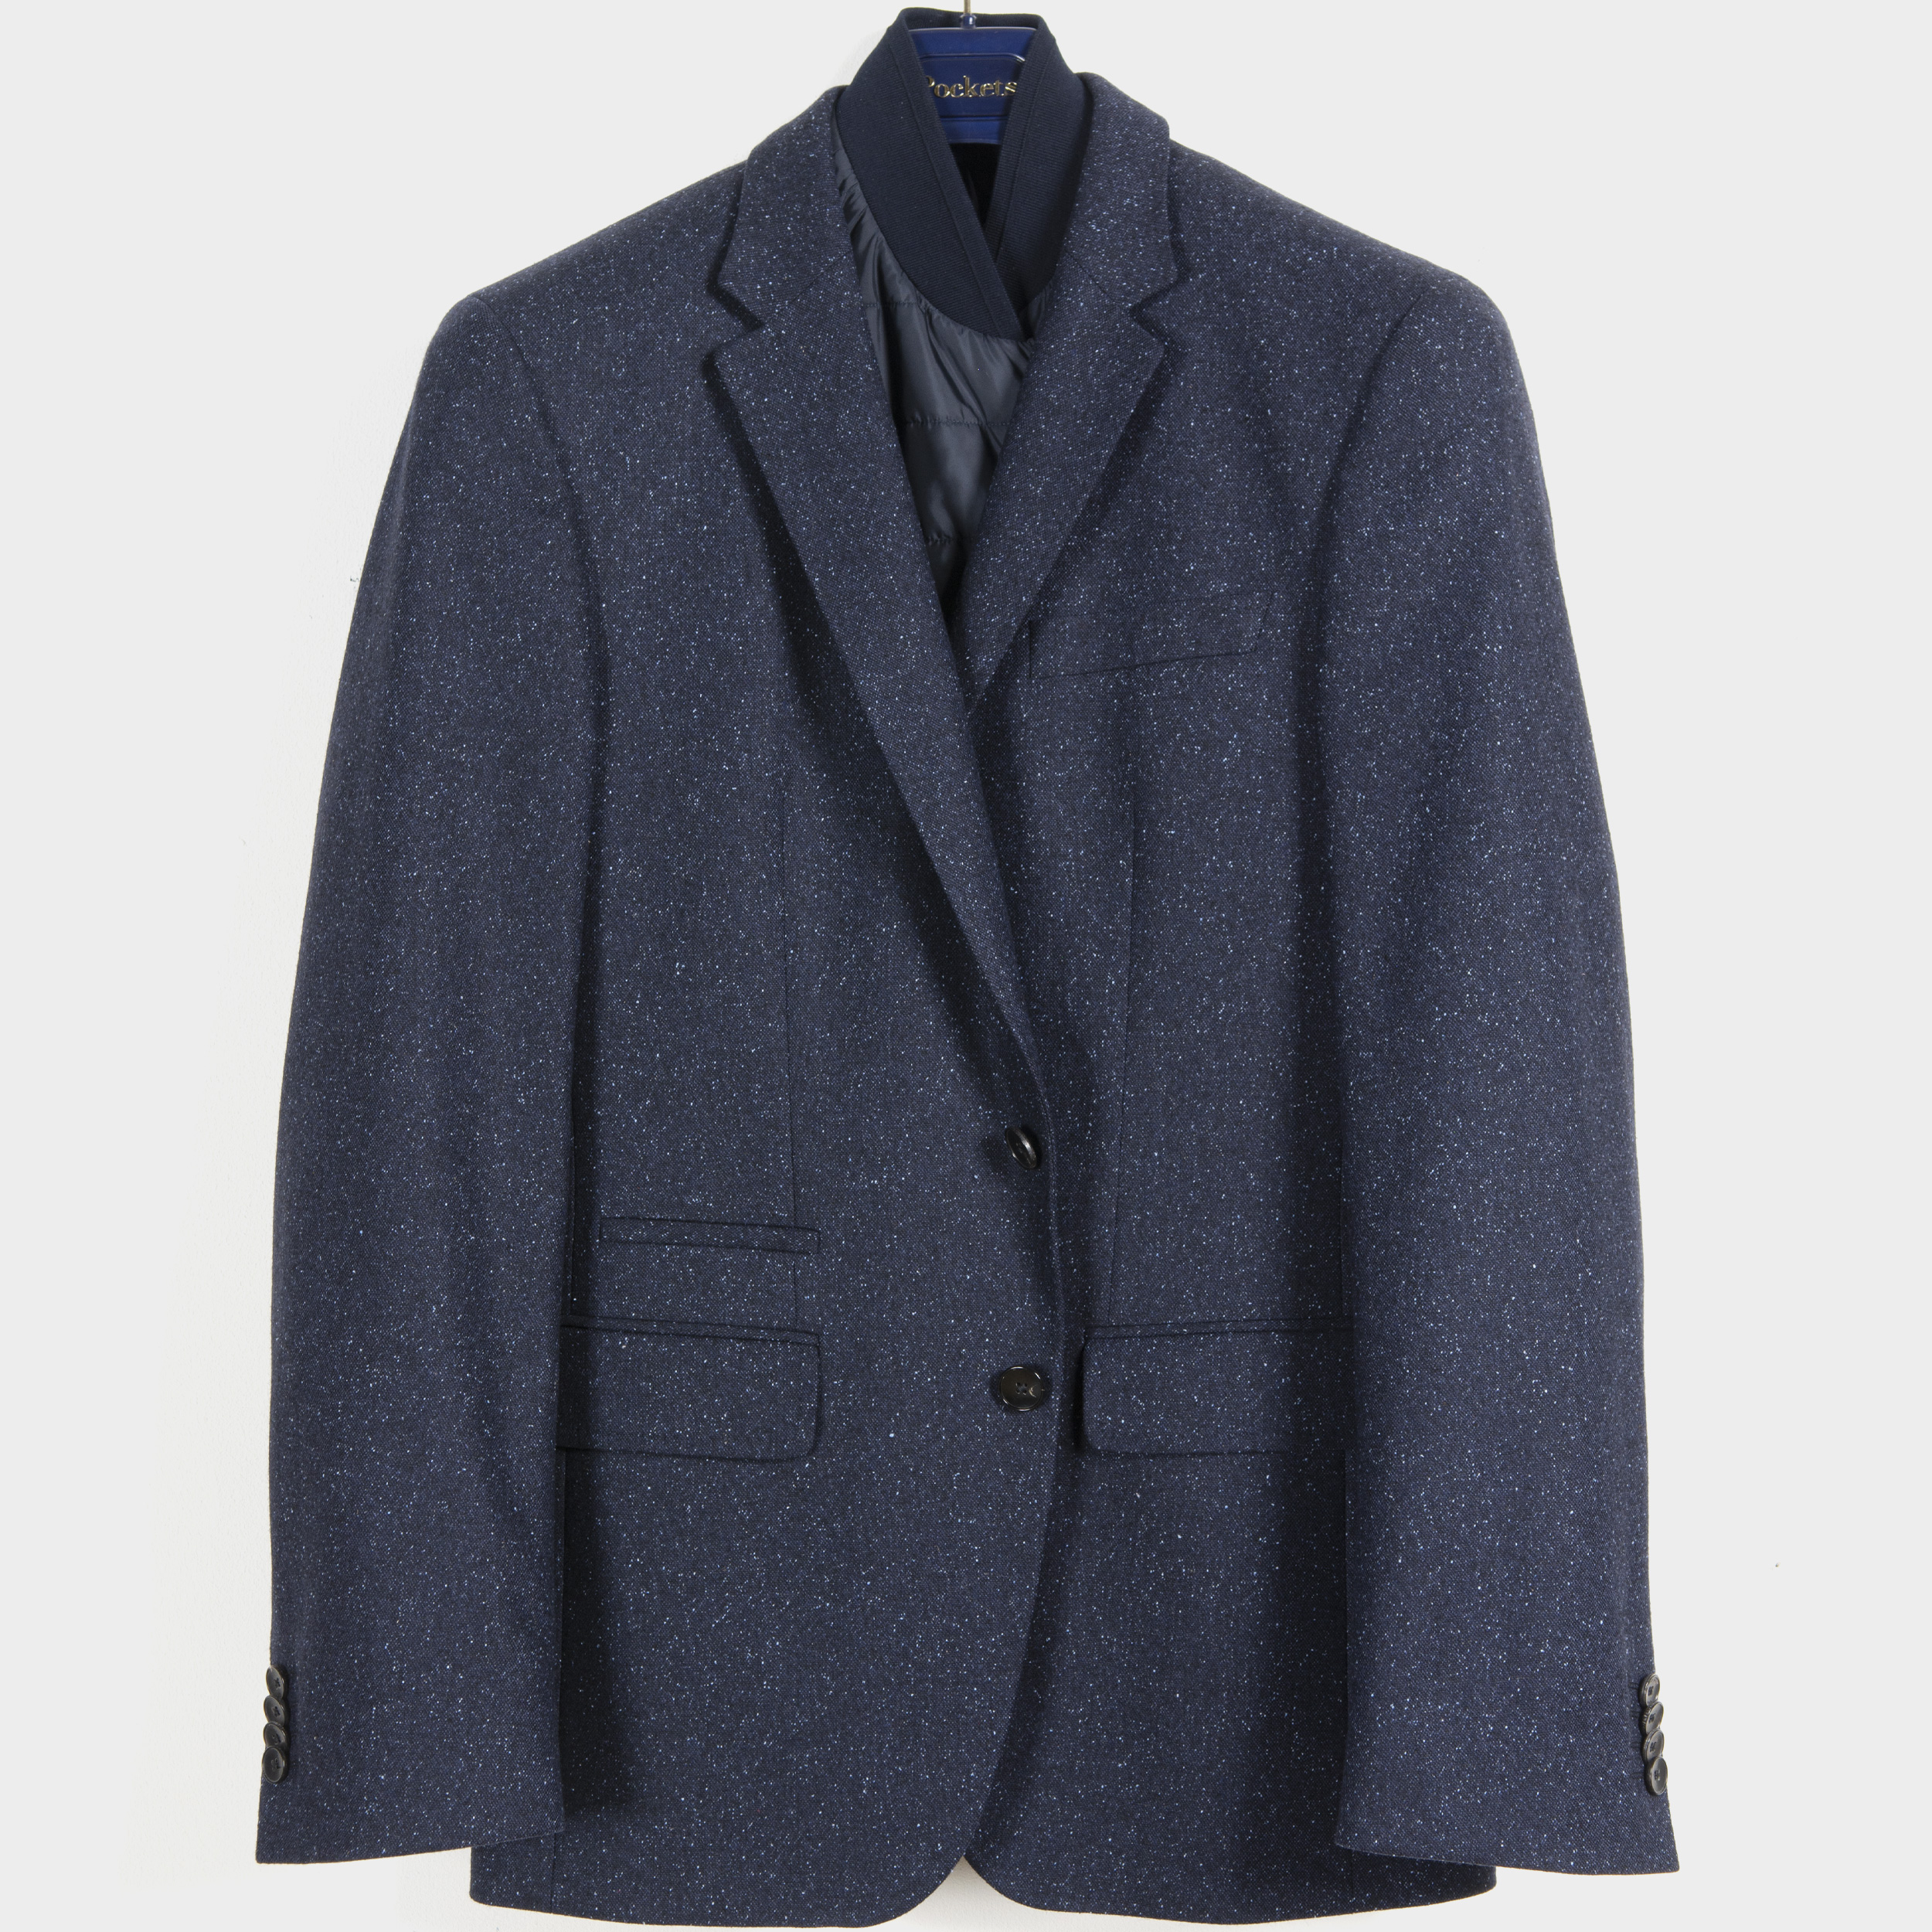 Hugo Boss ’Hadwart’ Fleck Wool Jacket With Removable Inner Navy/White